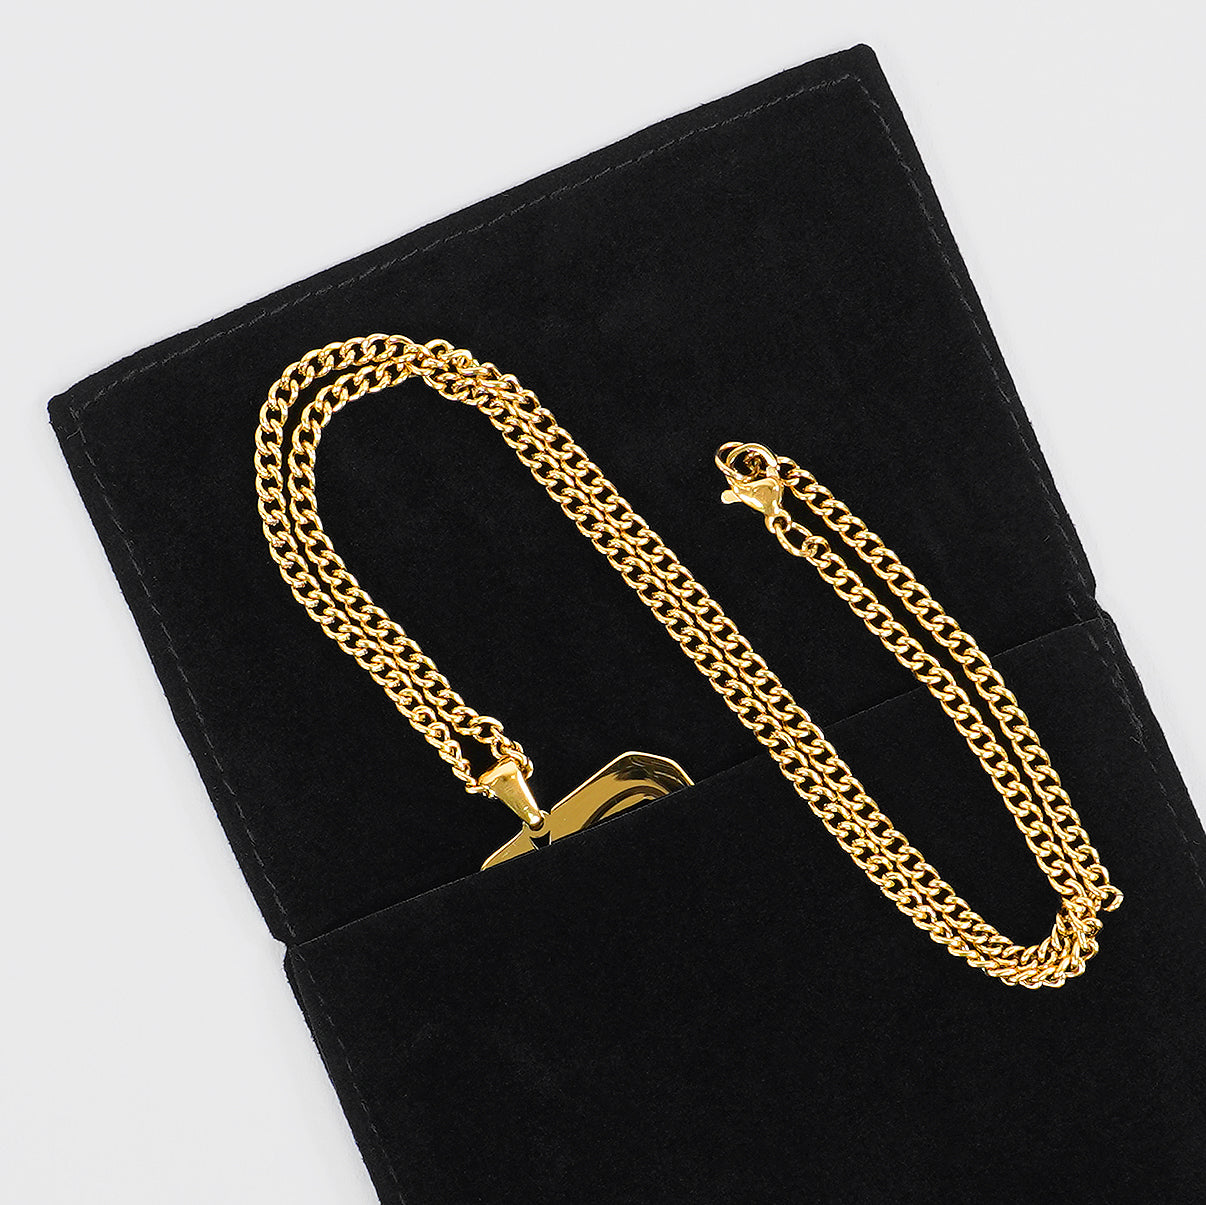 18 Number Pendant with Chain Necklace - Gold Plated Stainless Steel